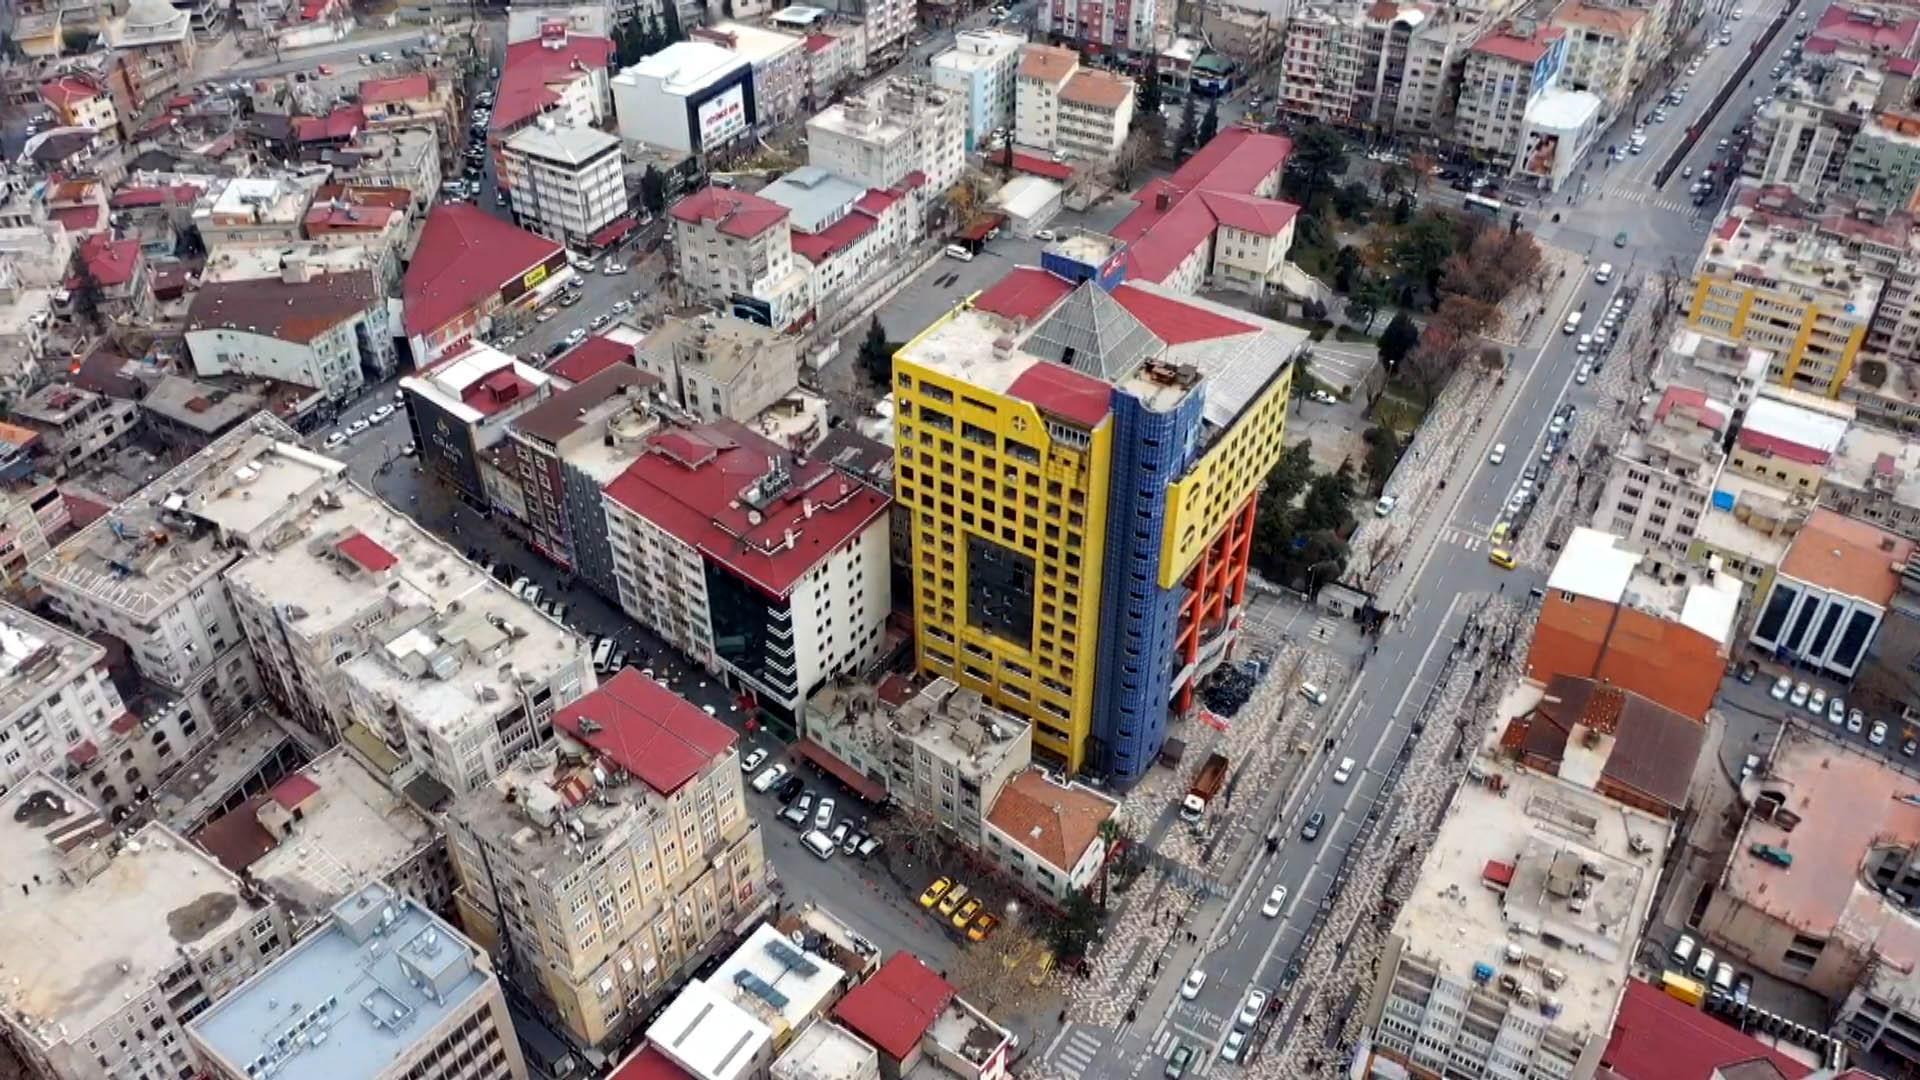 Demolition of worlds most ridiculous building begins in Turkey